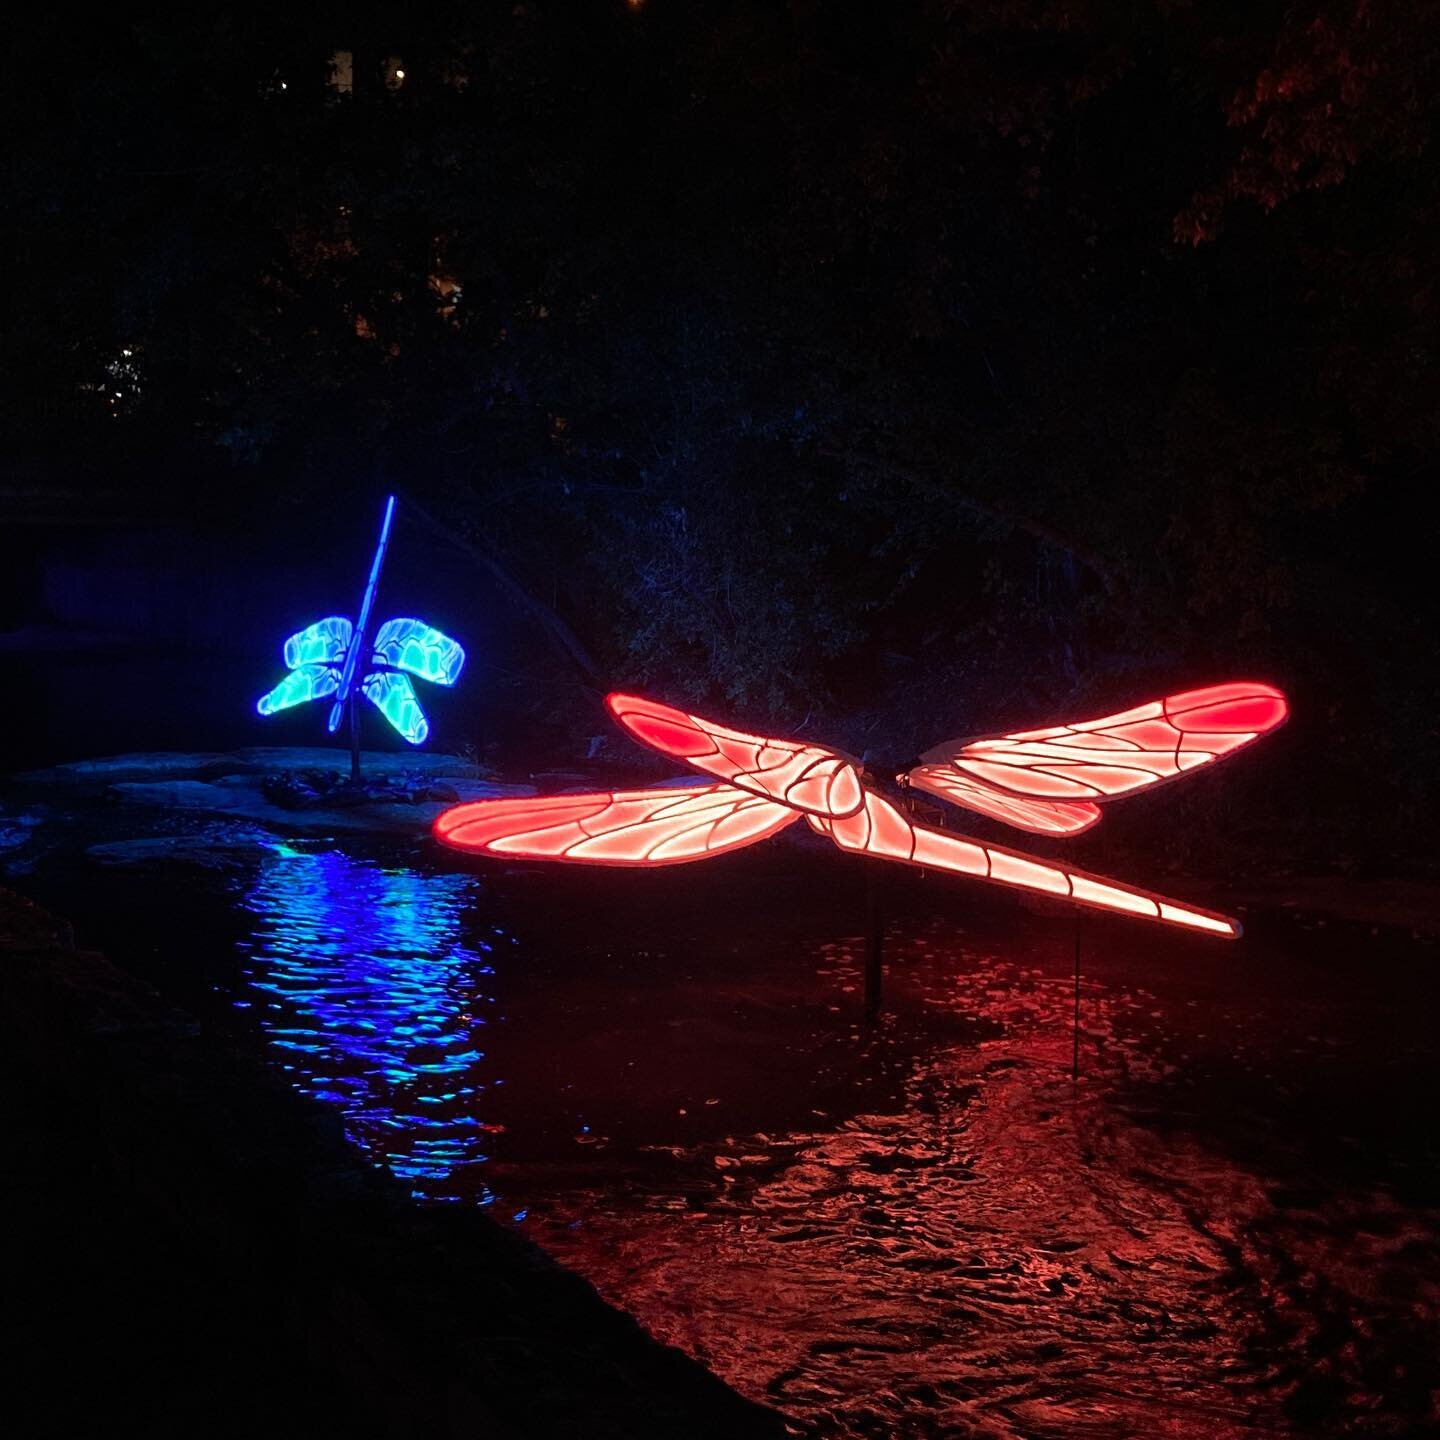 Last weekend of #creekshow ! We&rsquo;re very grateful to have been chosen to be part of this experience ❤️ 

Enter the Dragonfly is the name of our installation. We chose dragonflies for our concept, because they are an important indicator species f